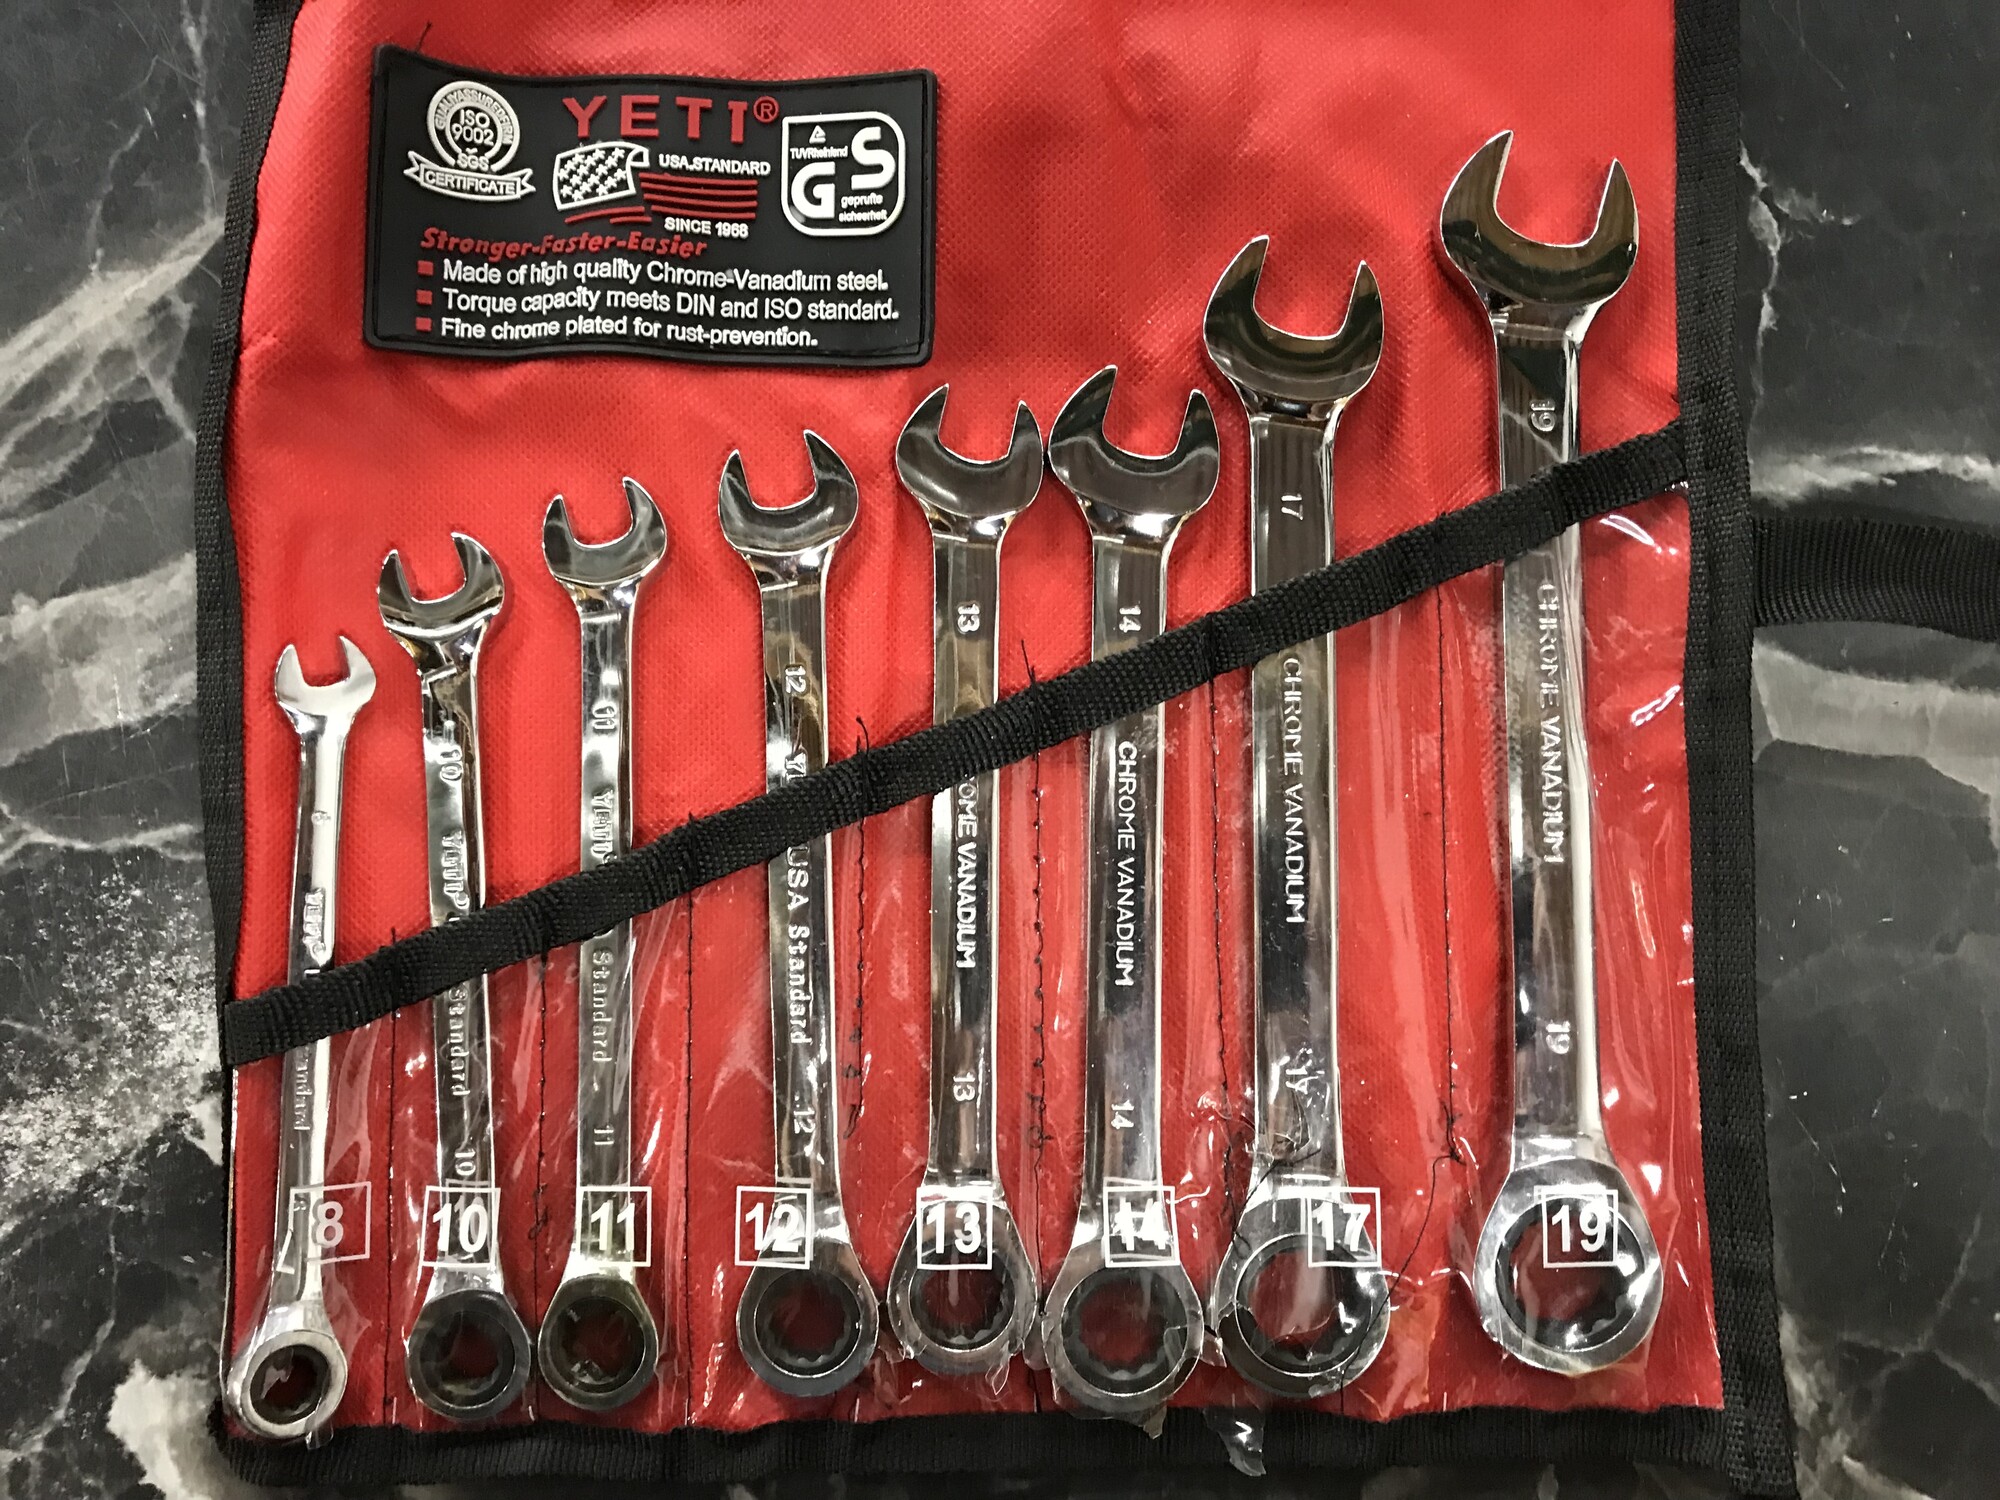 Ratcheting Wrench Set, YETI, Size: 8pc
Metric 8mm, 10mm, 11mm, 12m,13mm, 14mm,17mm,19mm